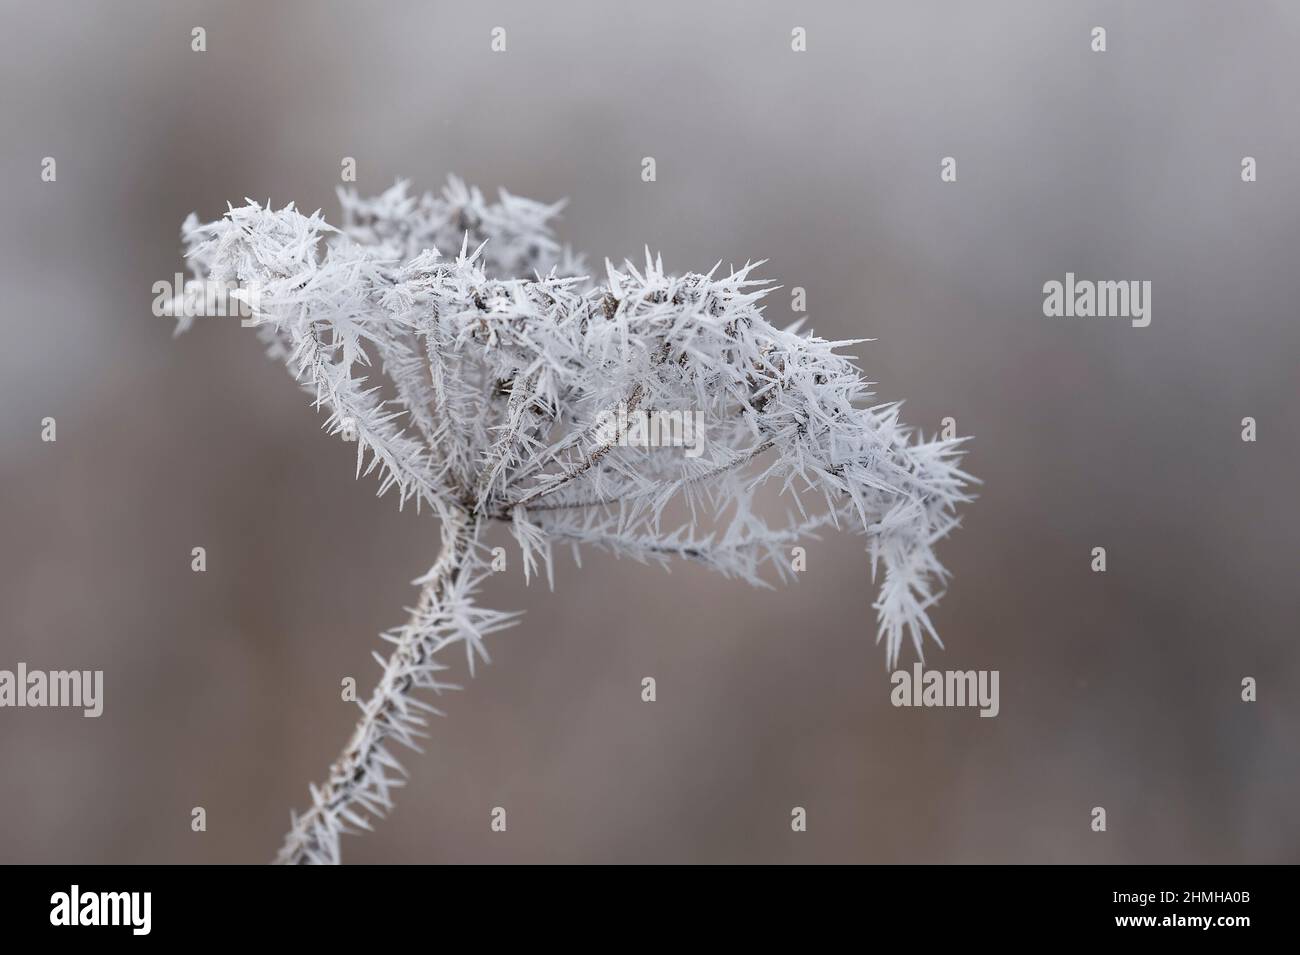 Hoar frost covers a dried up umbel of fennel, Germany, Baden-Wuerttemberg Stock Photo